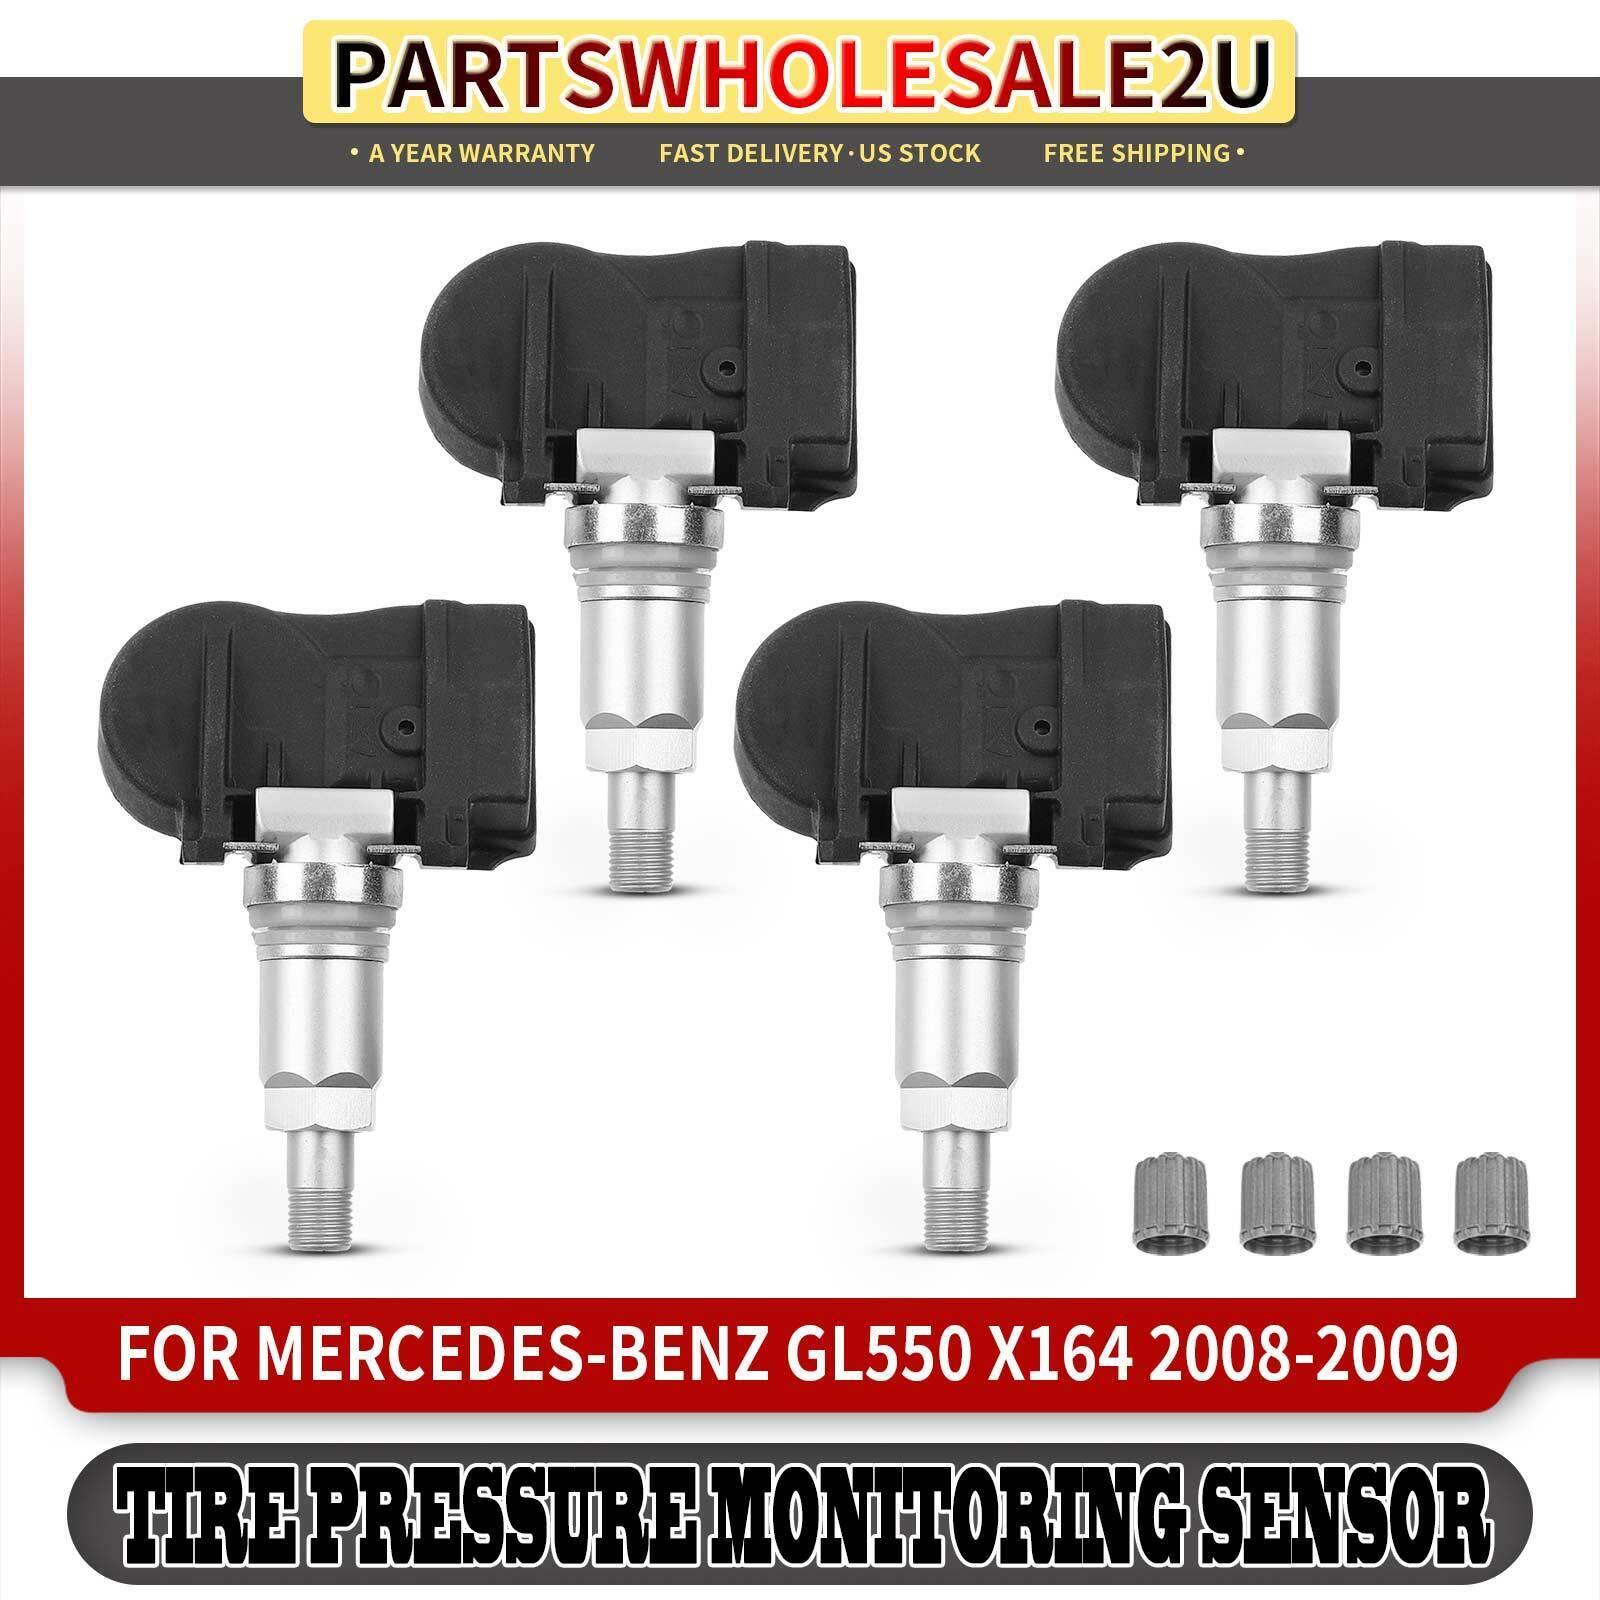 4x Tire Pressure Monitoring System Sensor for Mercedes-Benz CL550 E280 ML63 AMG